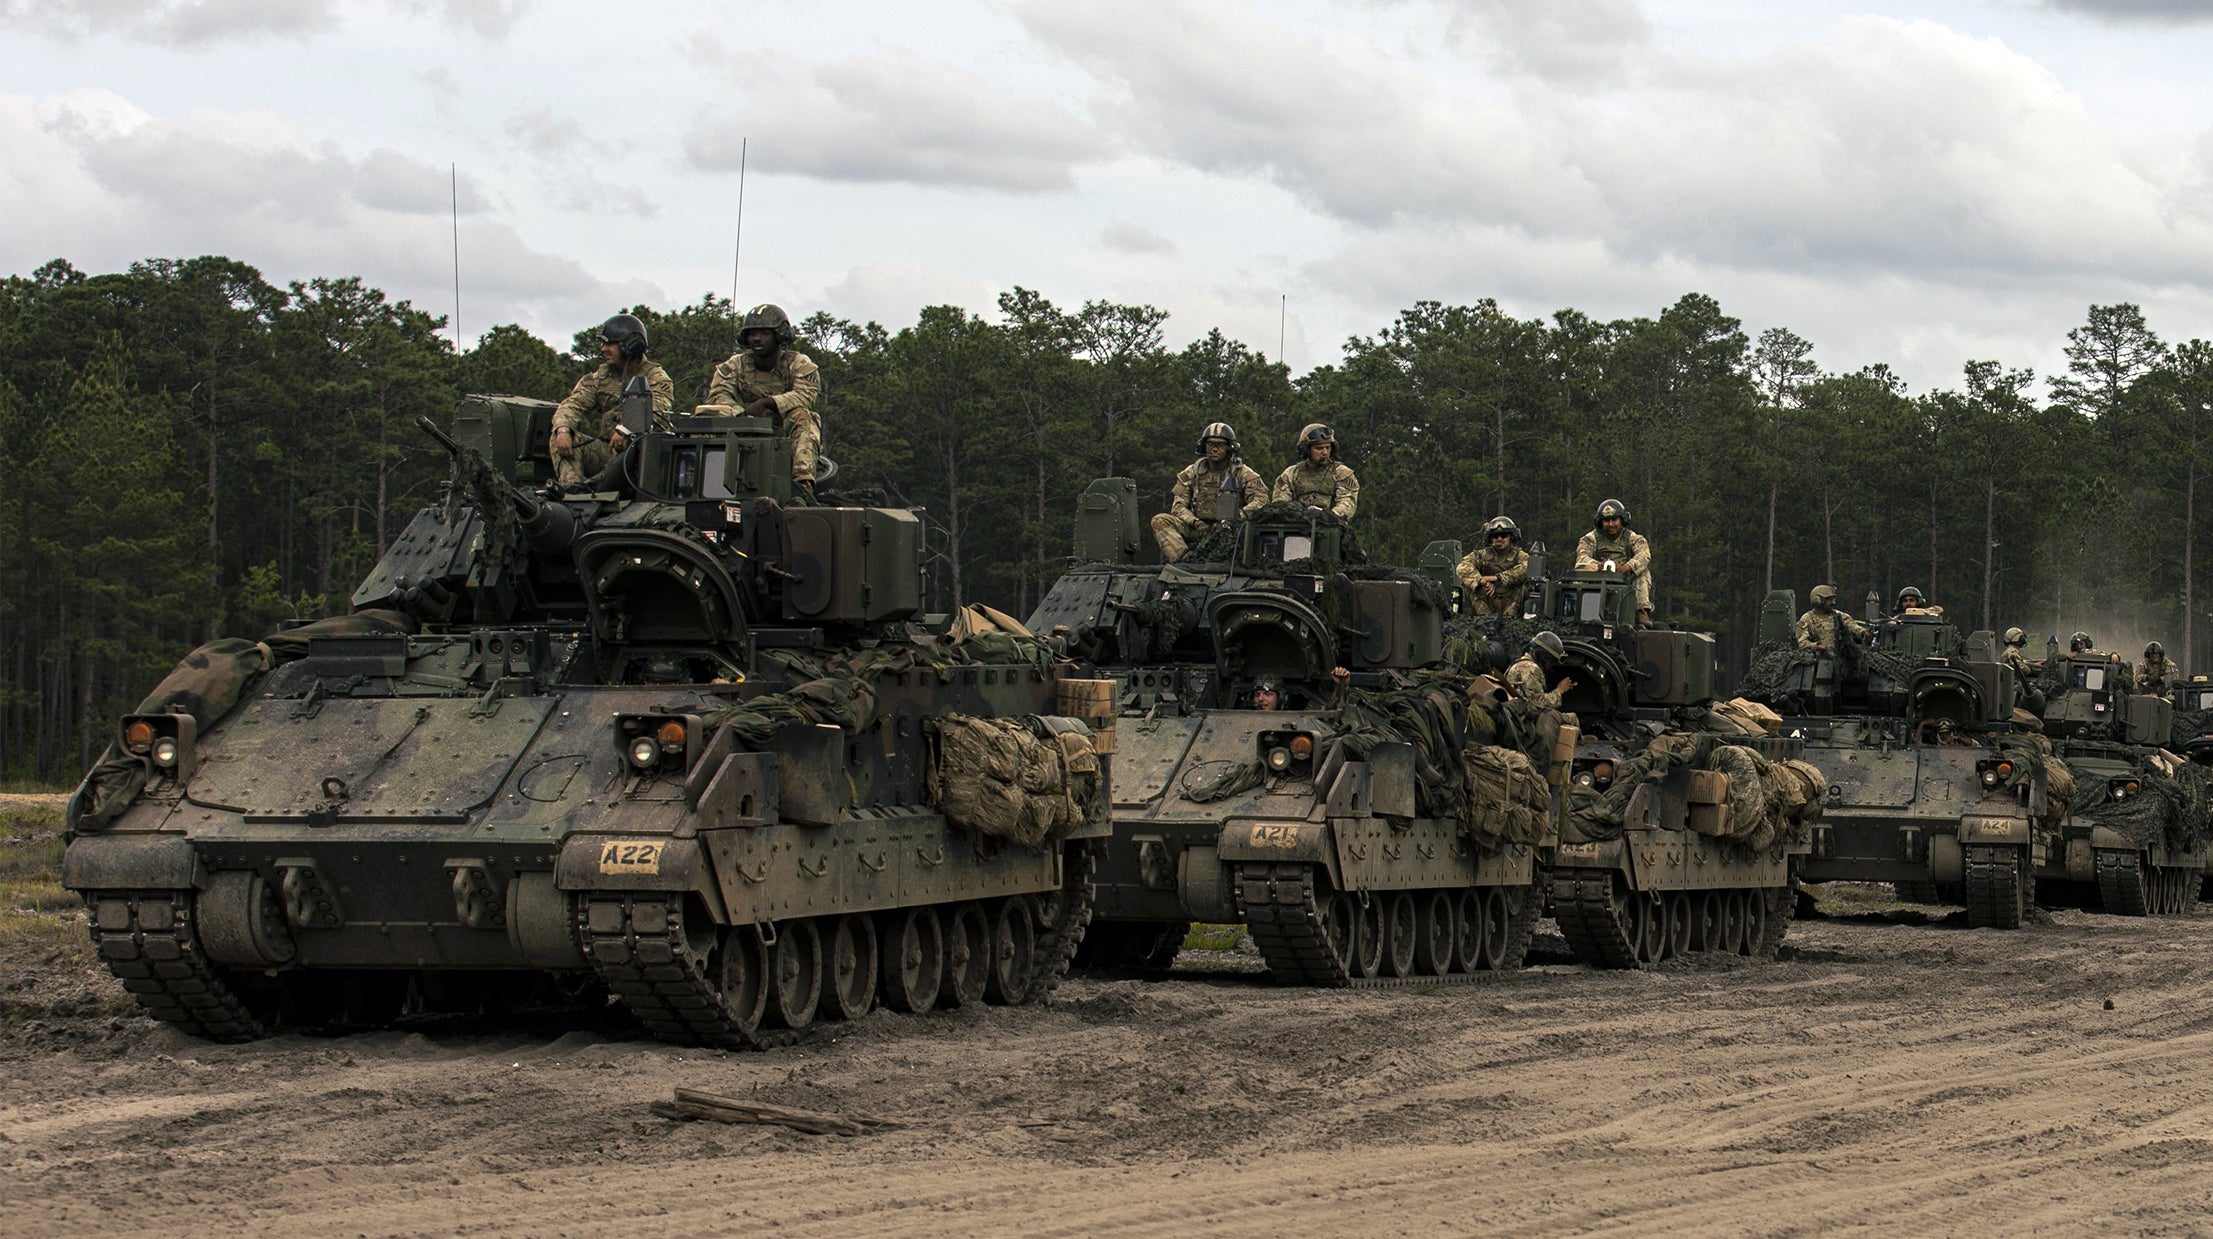 Four Bradley Fighting Vehicles in a line with Soldiers sitting atop